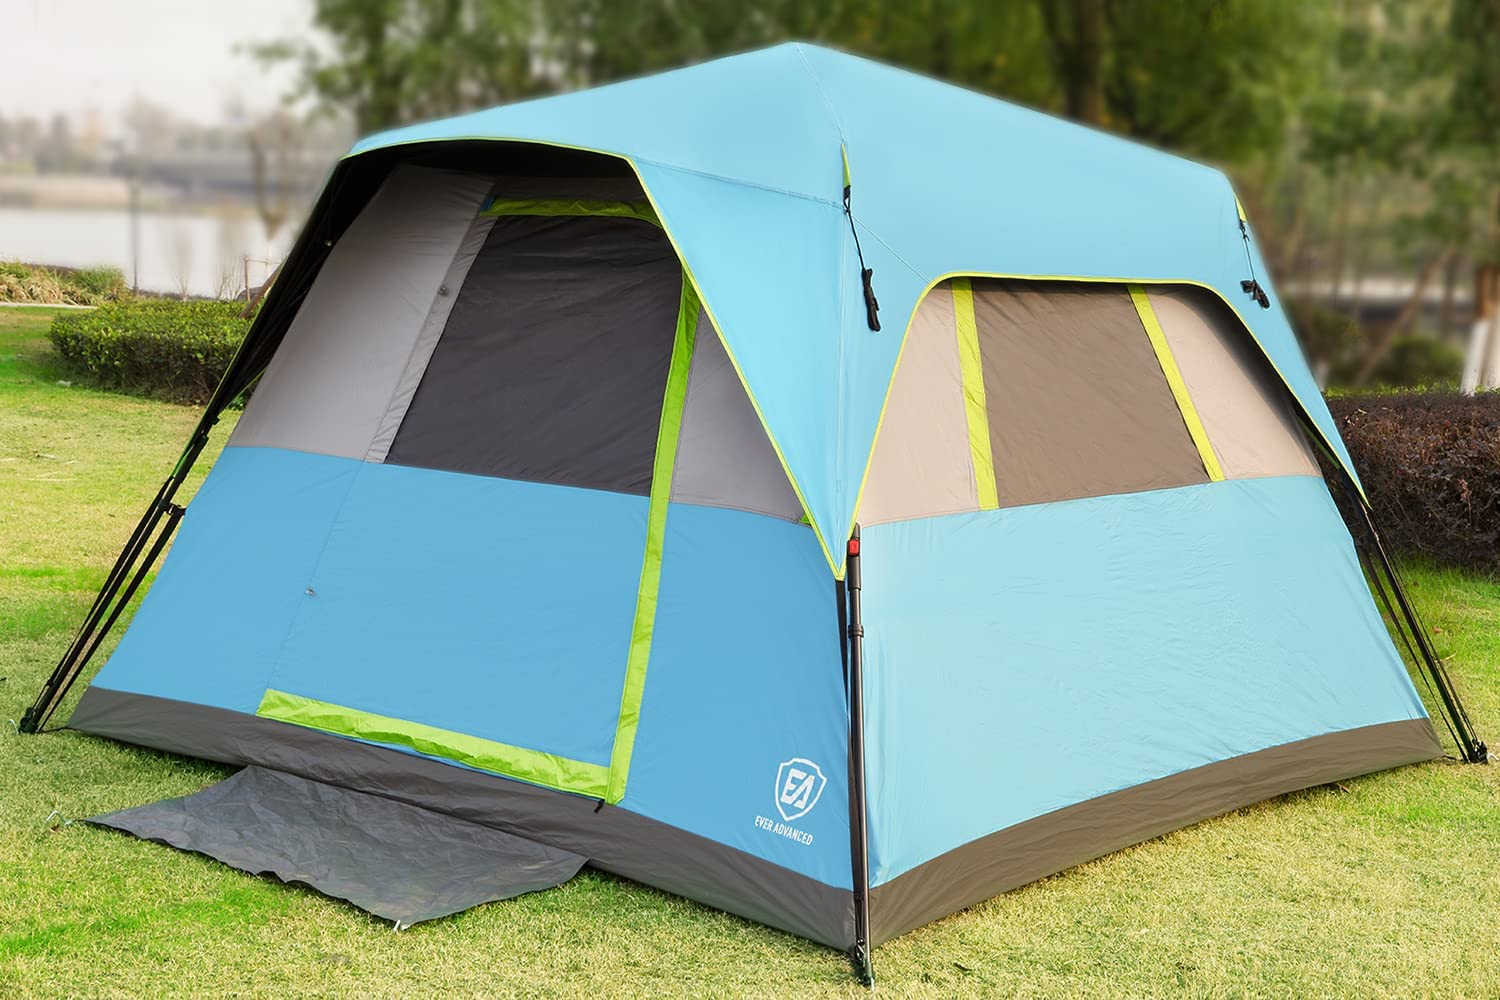 EVER ADVANCED Instant Blackout Camping Tent 6 Person Cabin Tents for Family with Rainfly, 60s Easy Setup, Water-Resistant, Blue